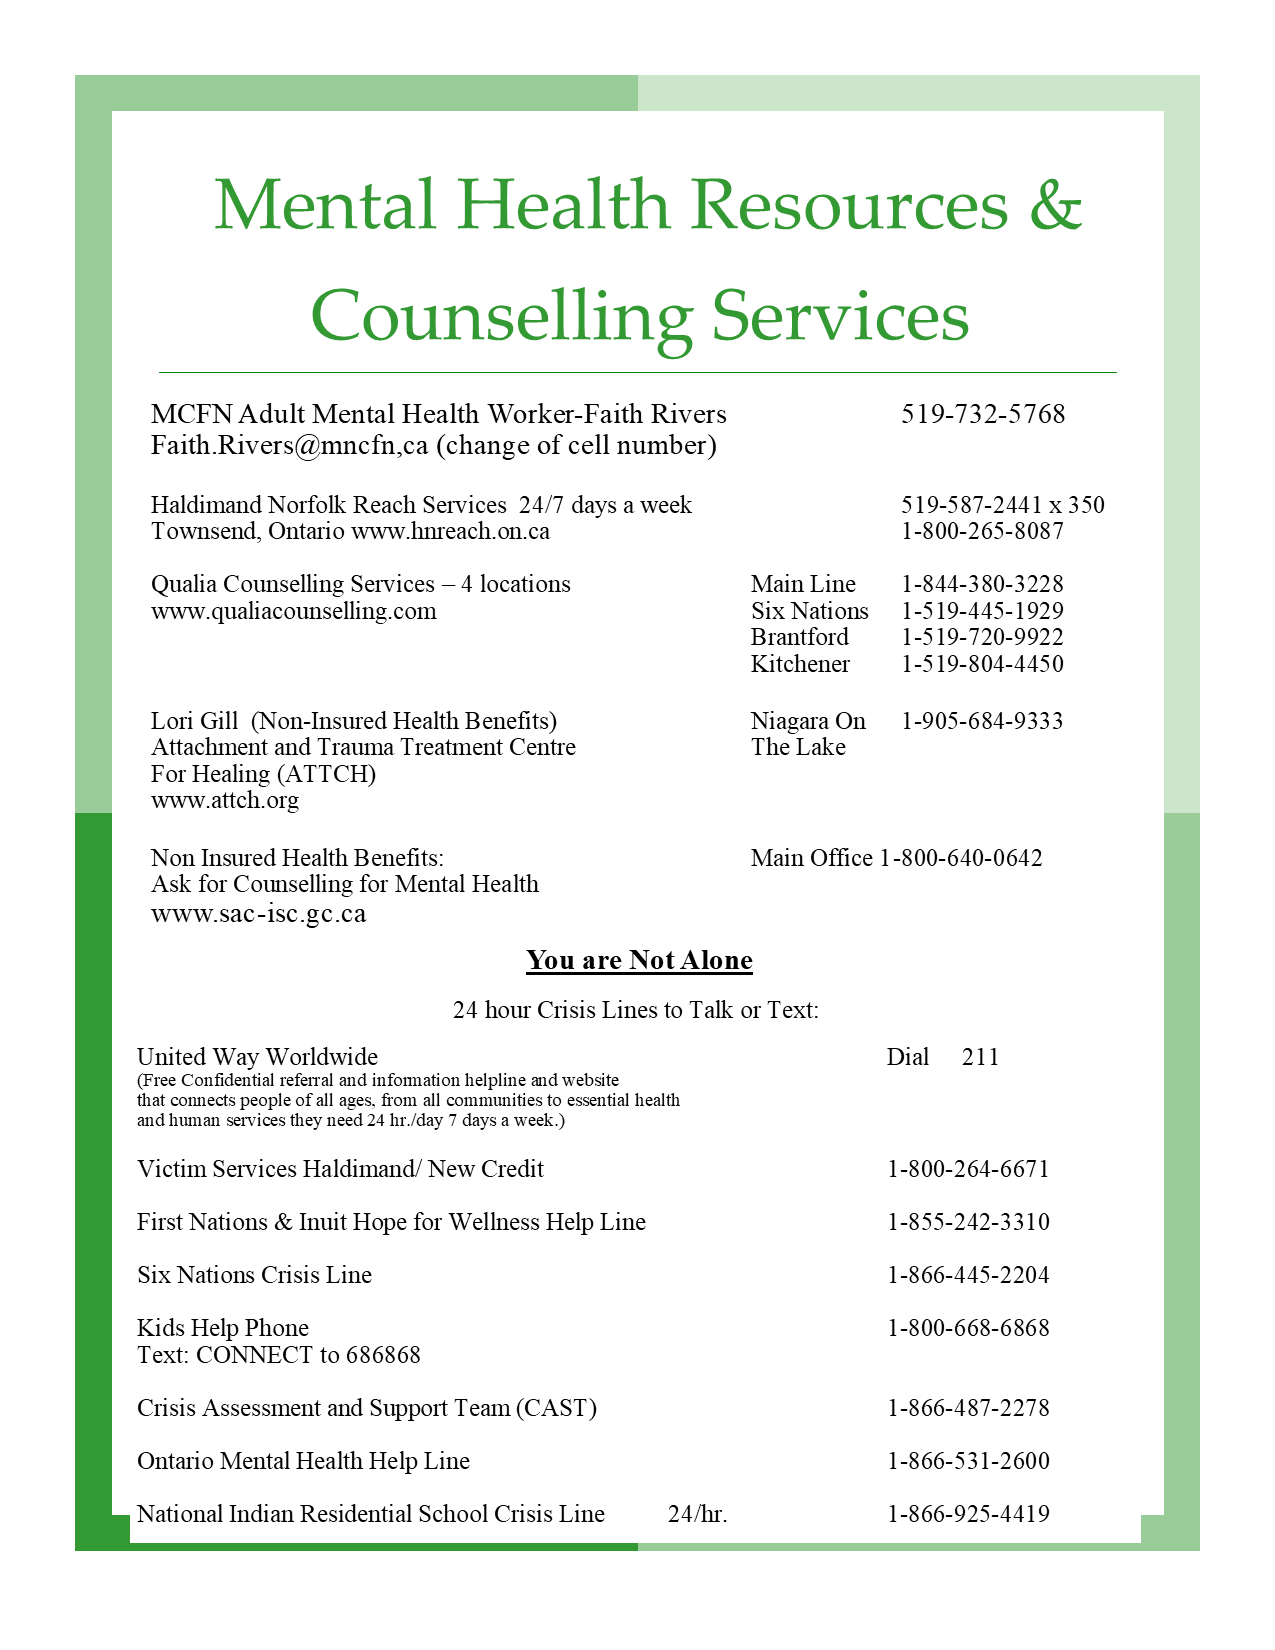 Updated Mental Health Resources